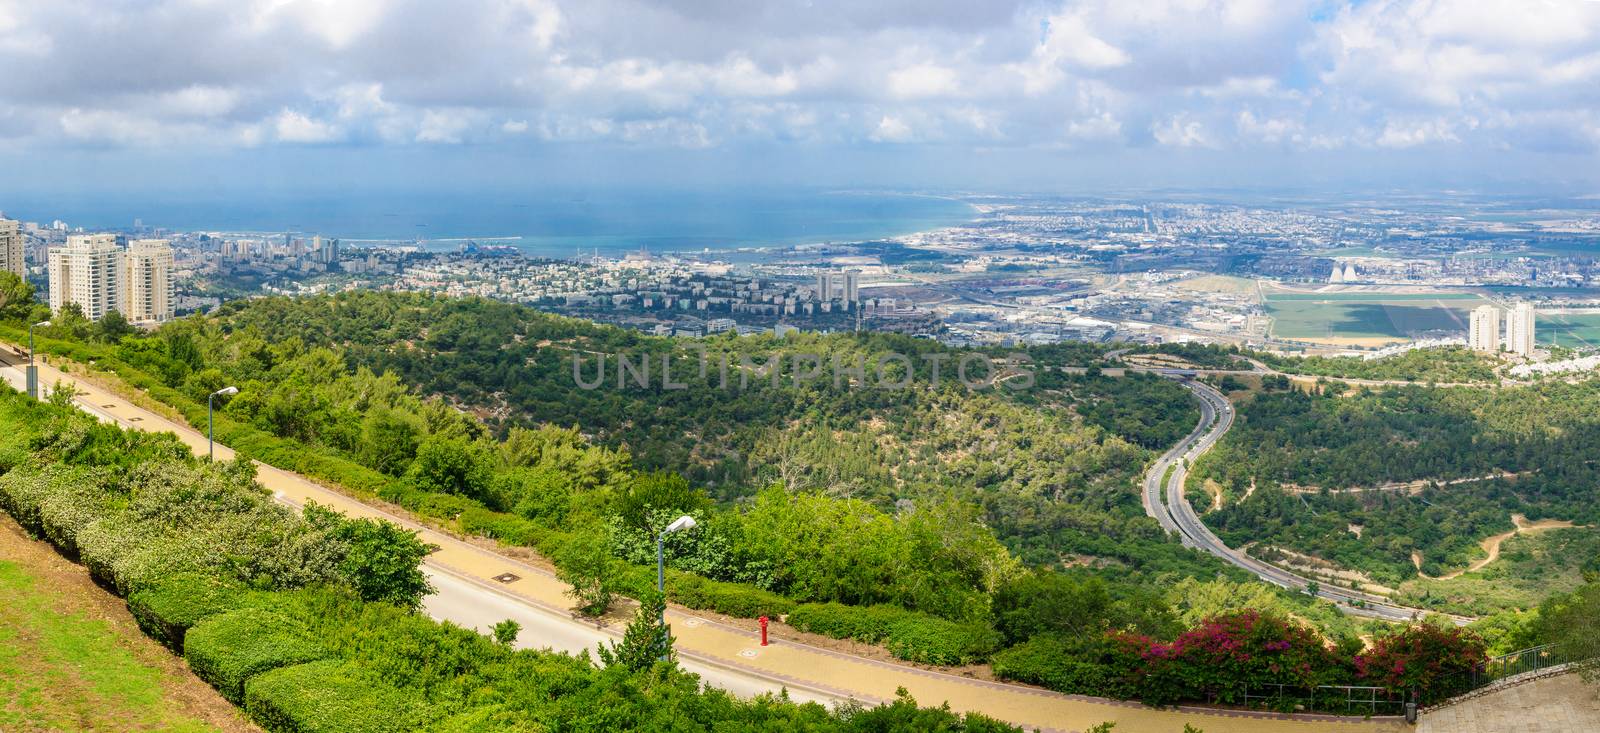 Panoramic view of the bay of Haifa, with downtown Haifa, the harbor, the industrial zone and the slope of Mount Carmel. Viewed from Haifa University. Haifa, Northern Israel